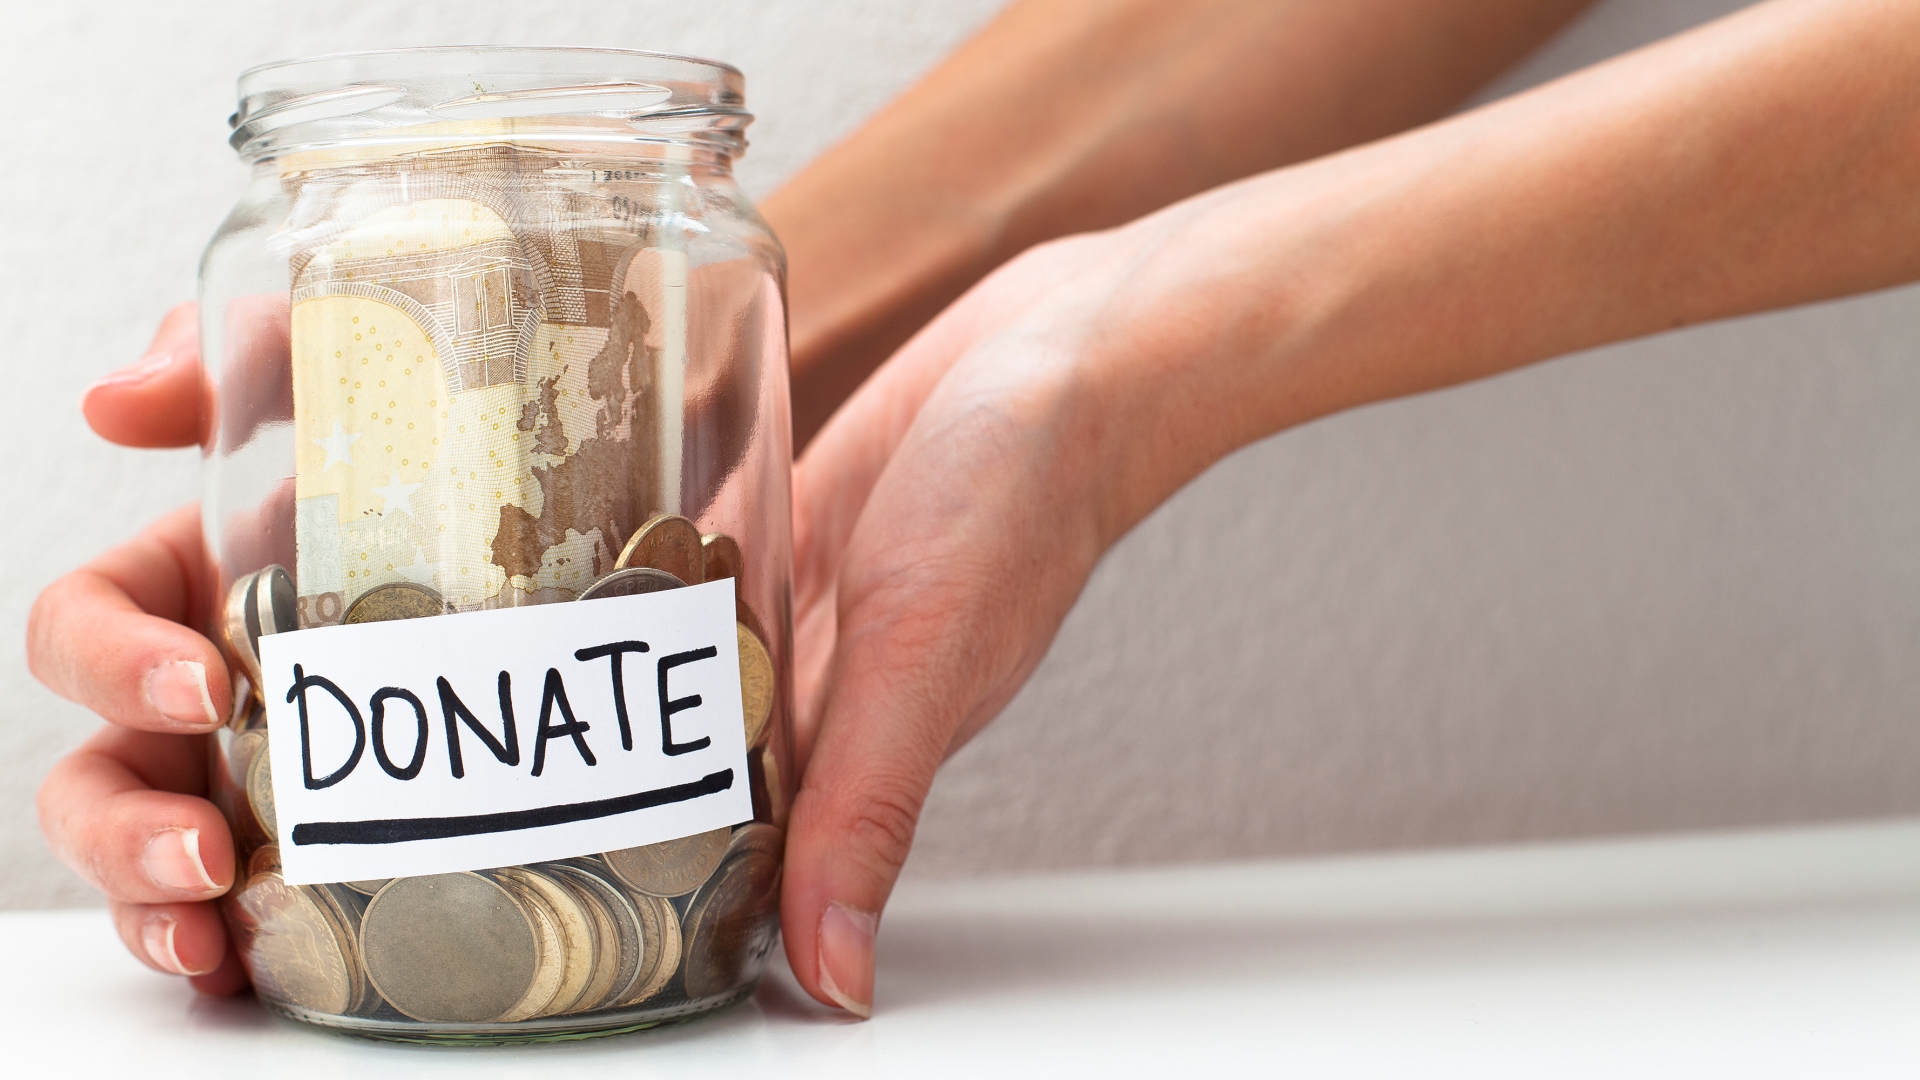 5 Reasons Why Donating Your Hard-Earned Money to Charity Is Worth It